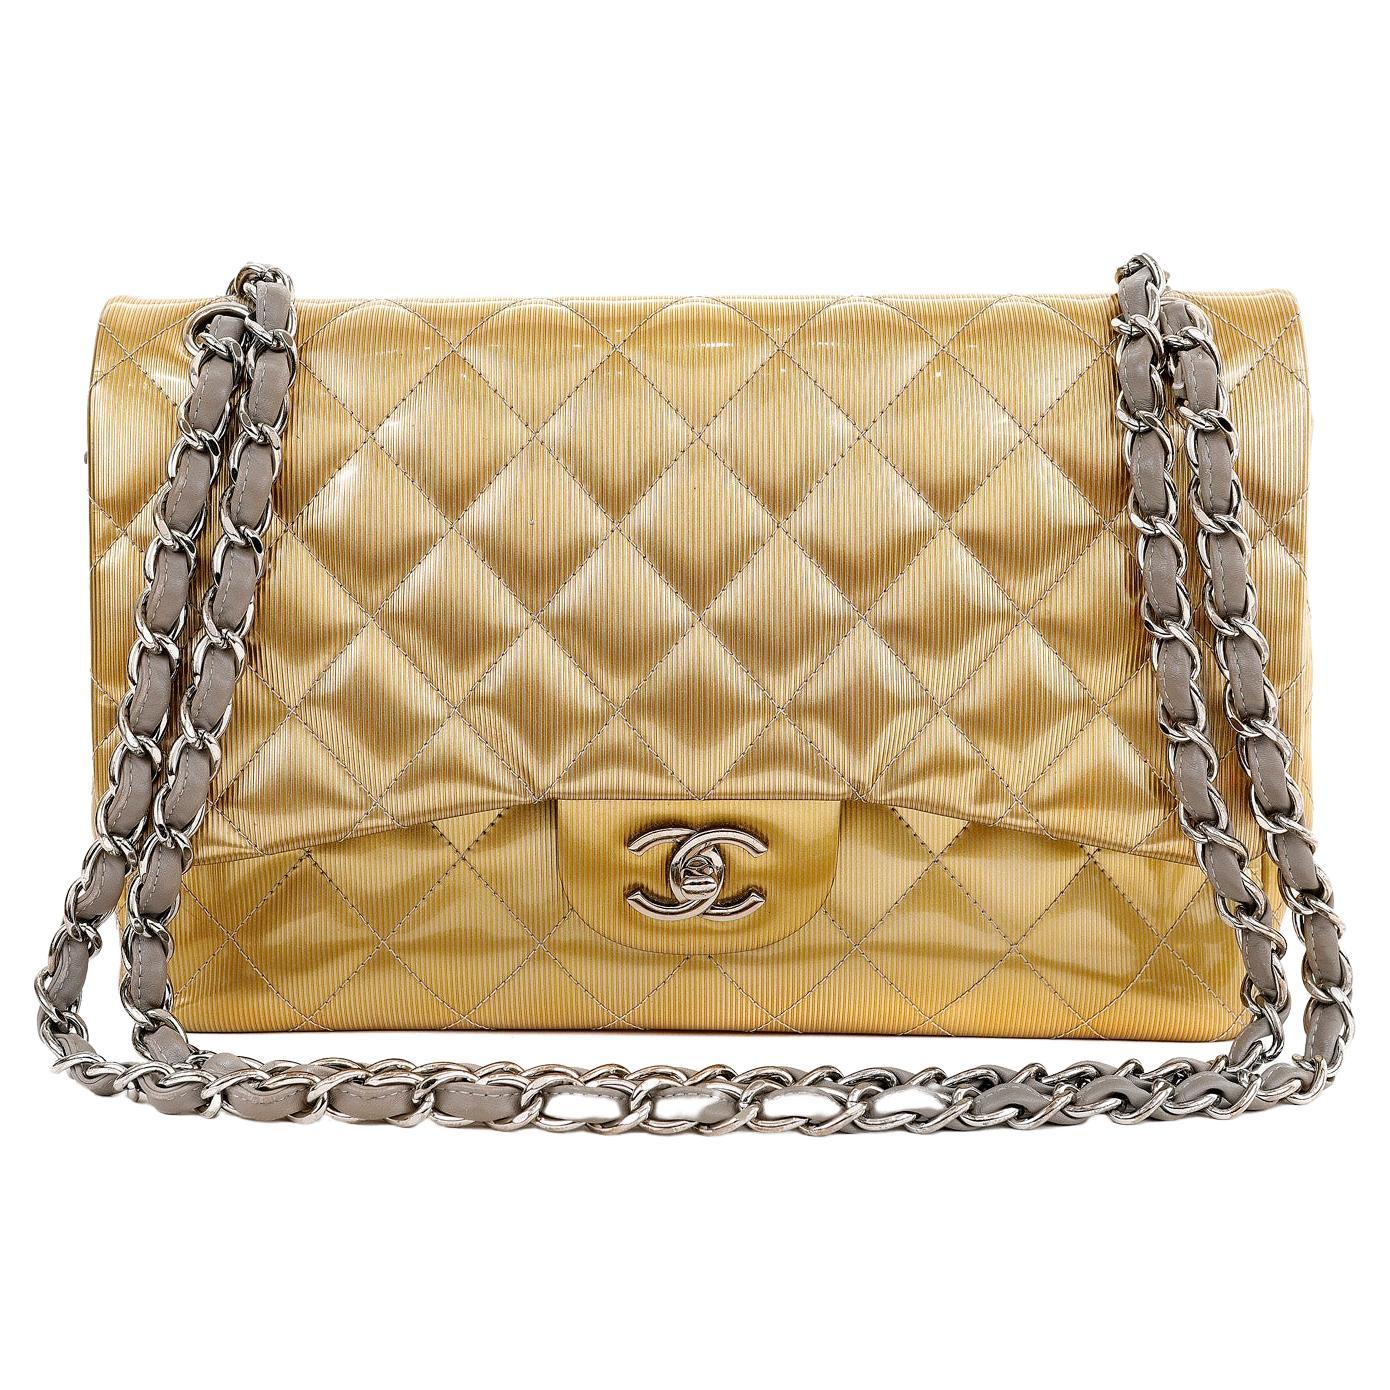 Chanel Bright Yellow Quilted Lambskin Jumbo Classic Double Flap Bag, 1stdibs.com